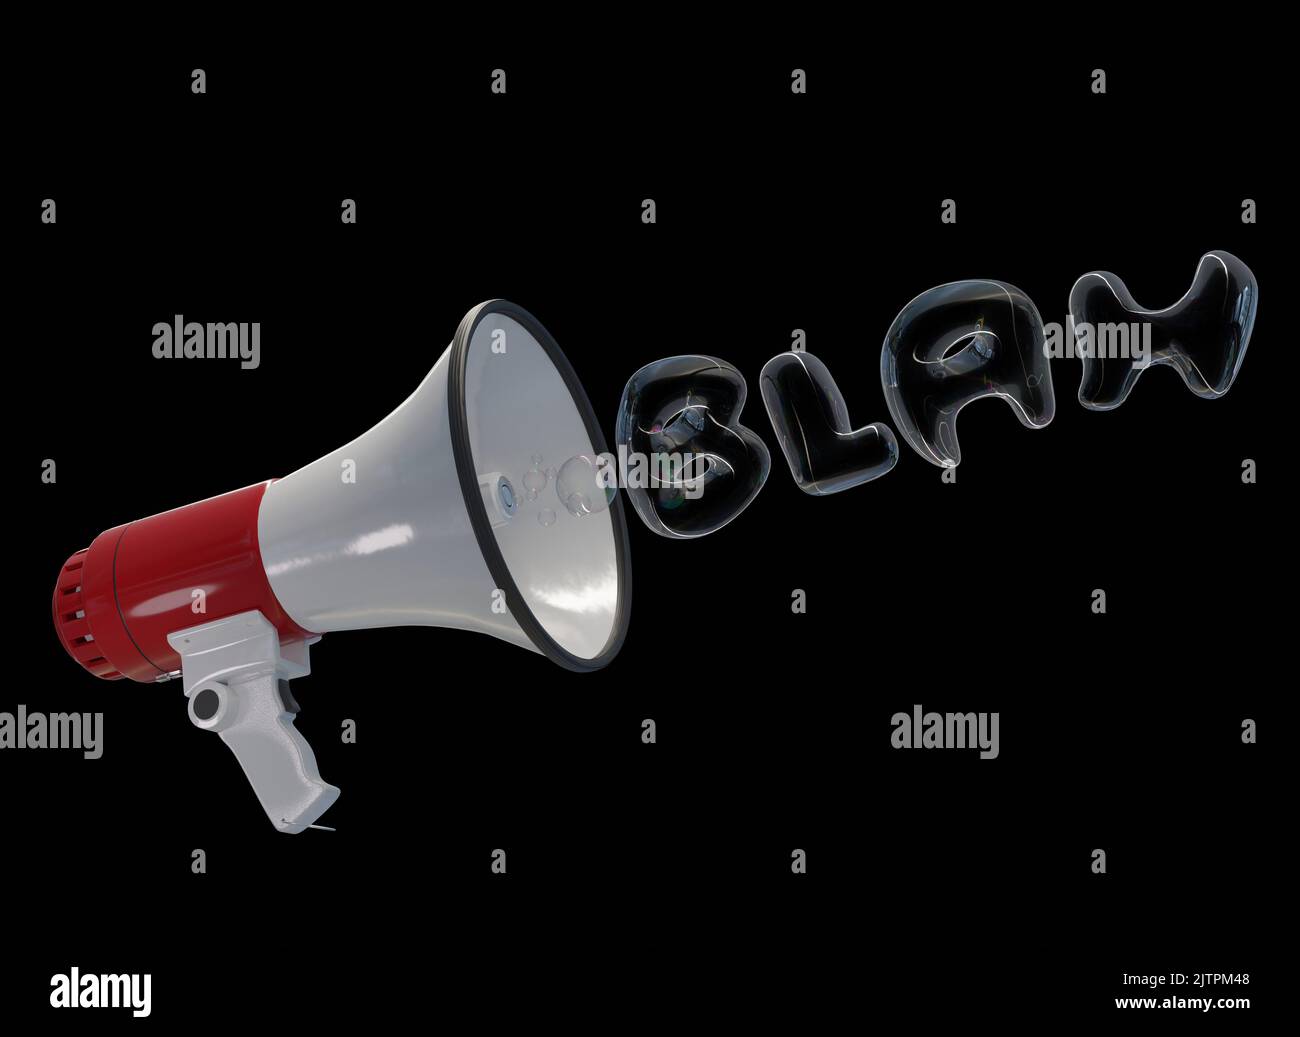 3D generated megaphone on black background, emitting soap bubbles forming the word Blah. Stock Photo